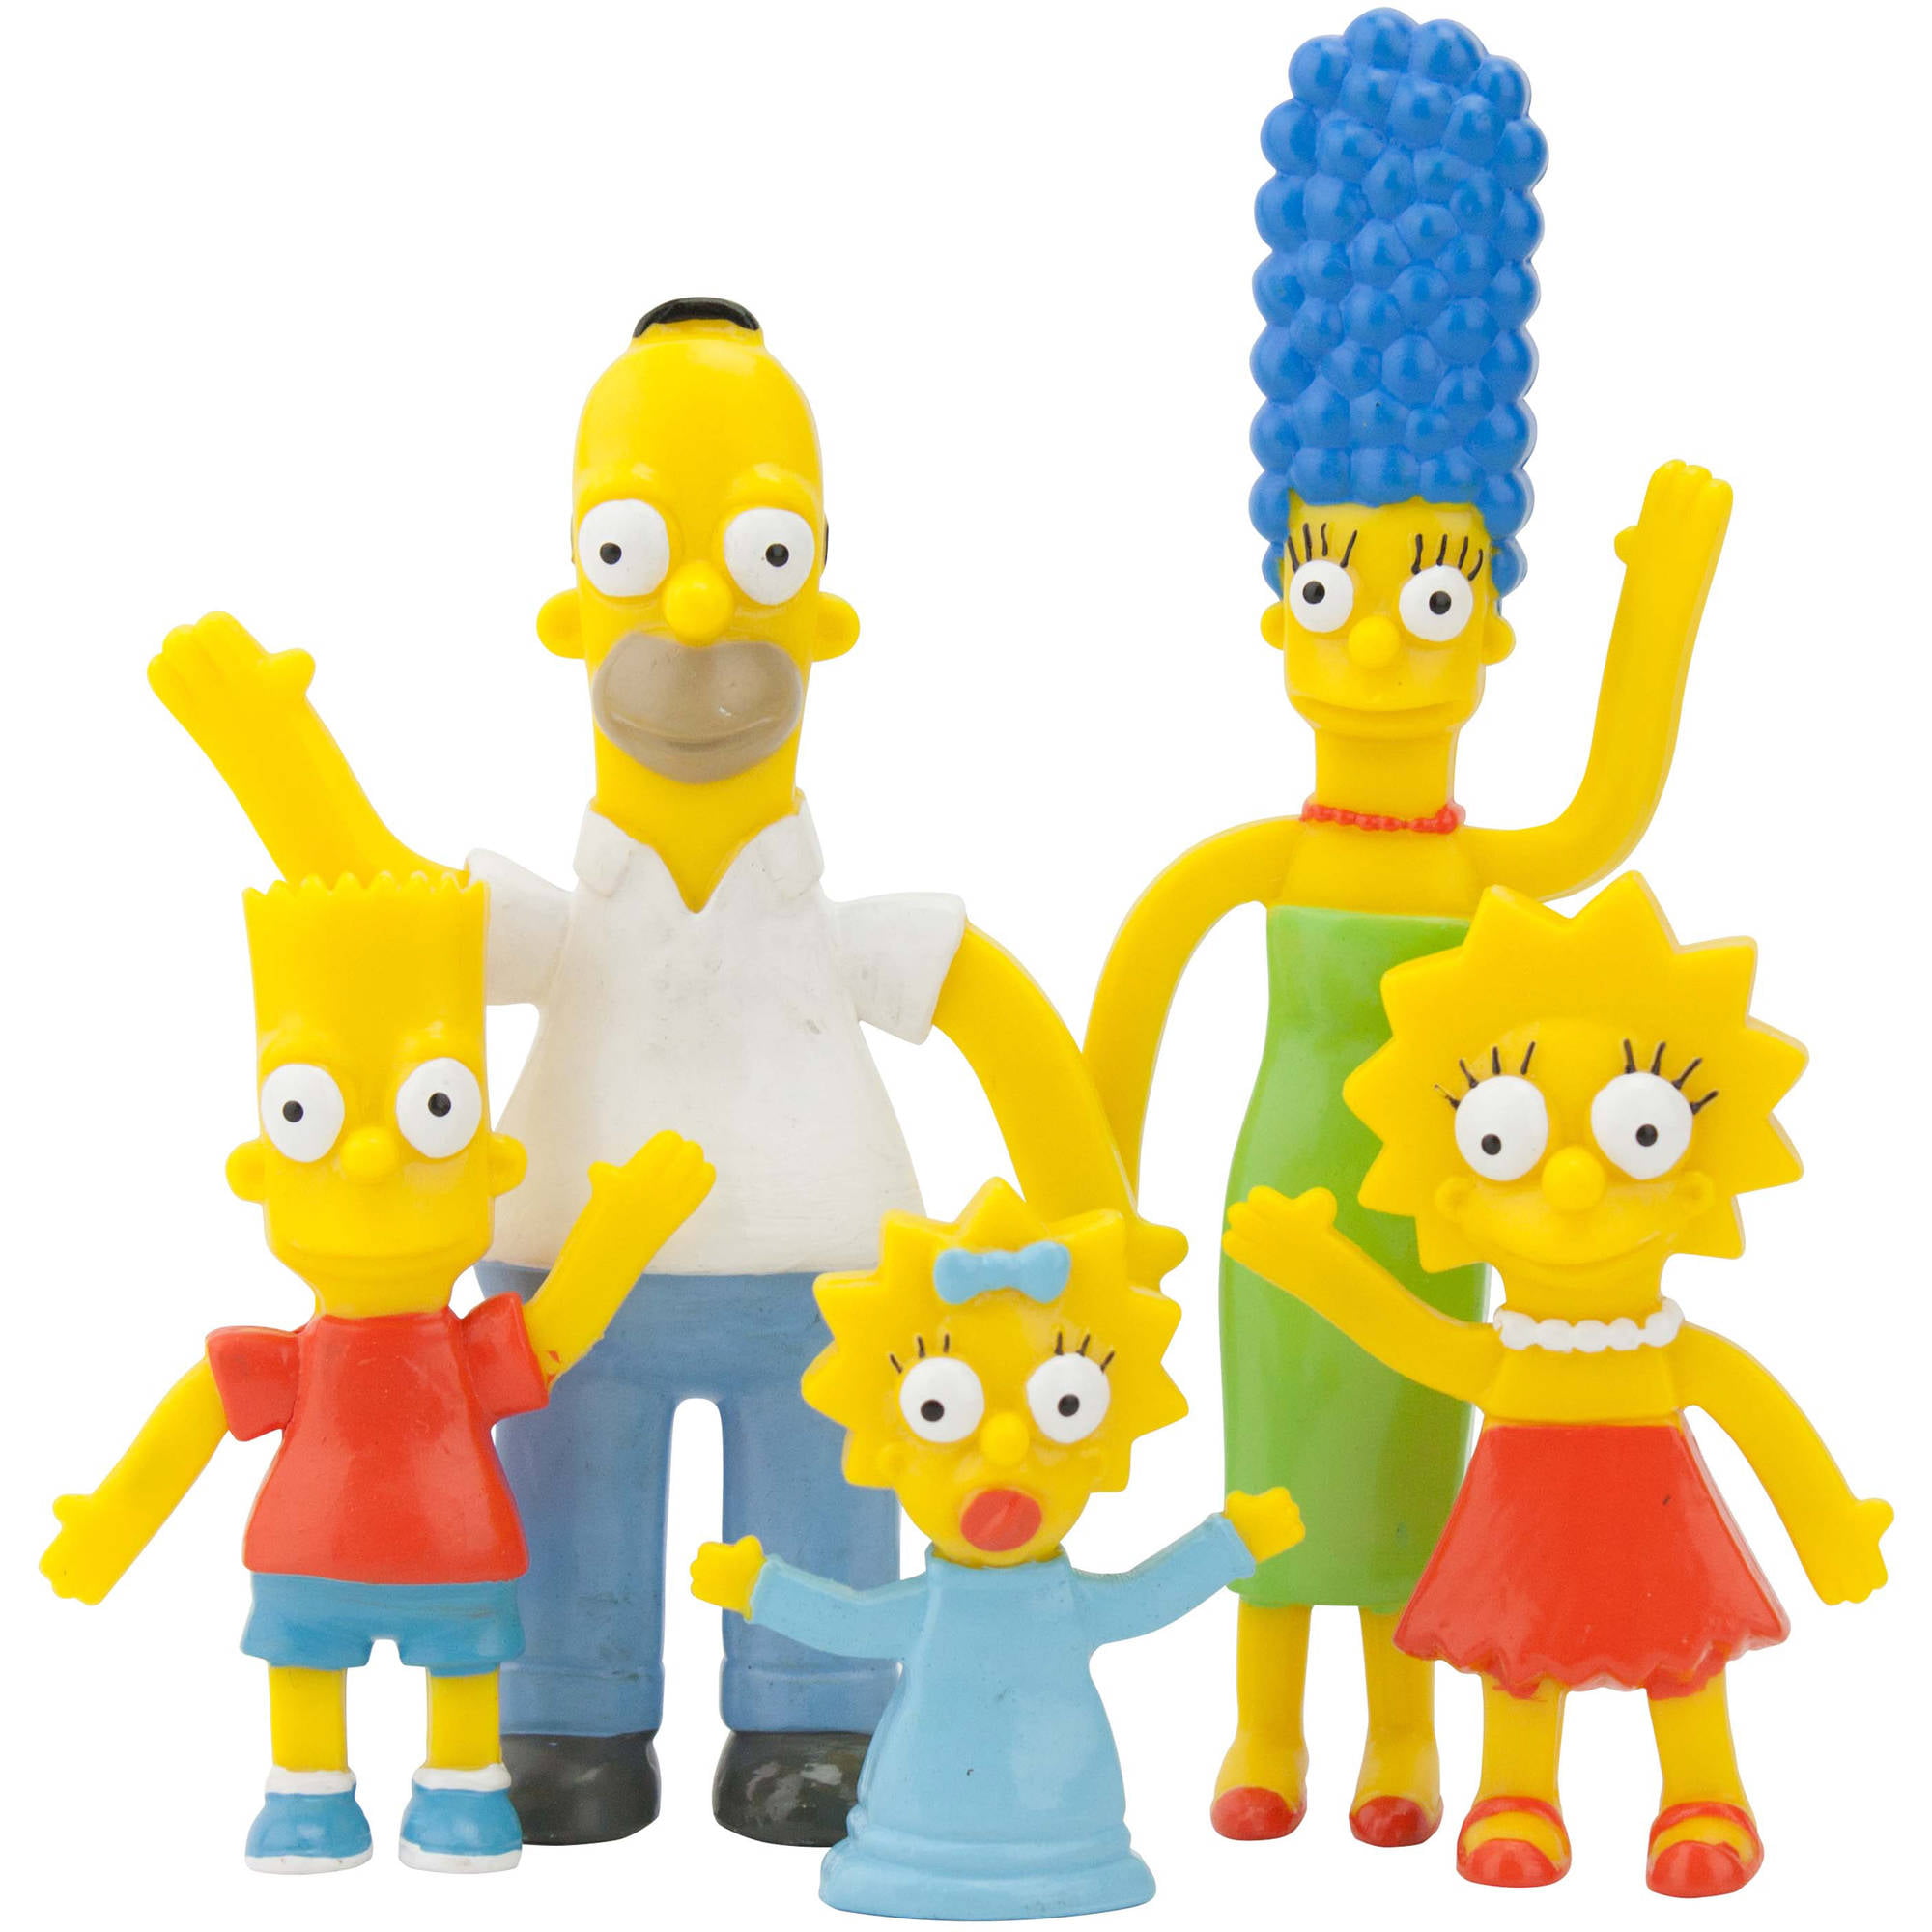 Action Figures - The Simpsons - 3